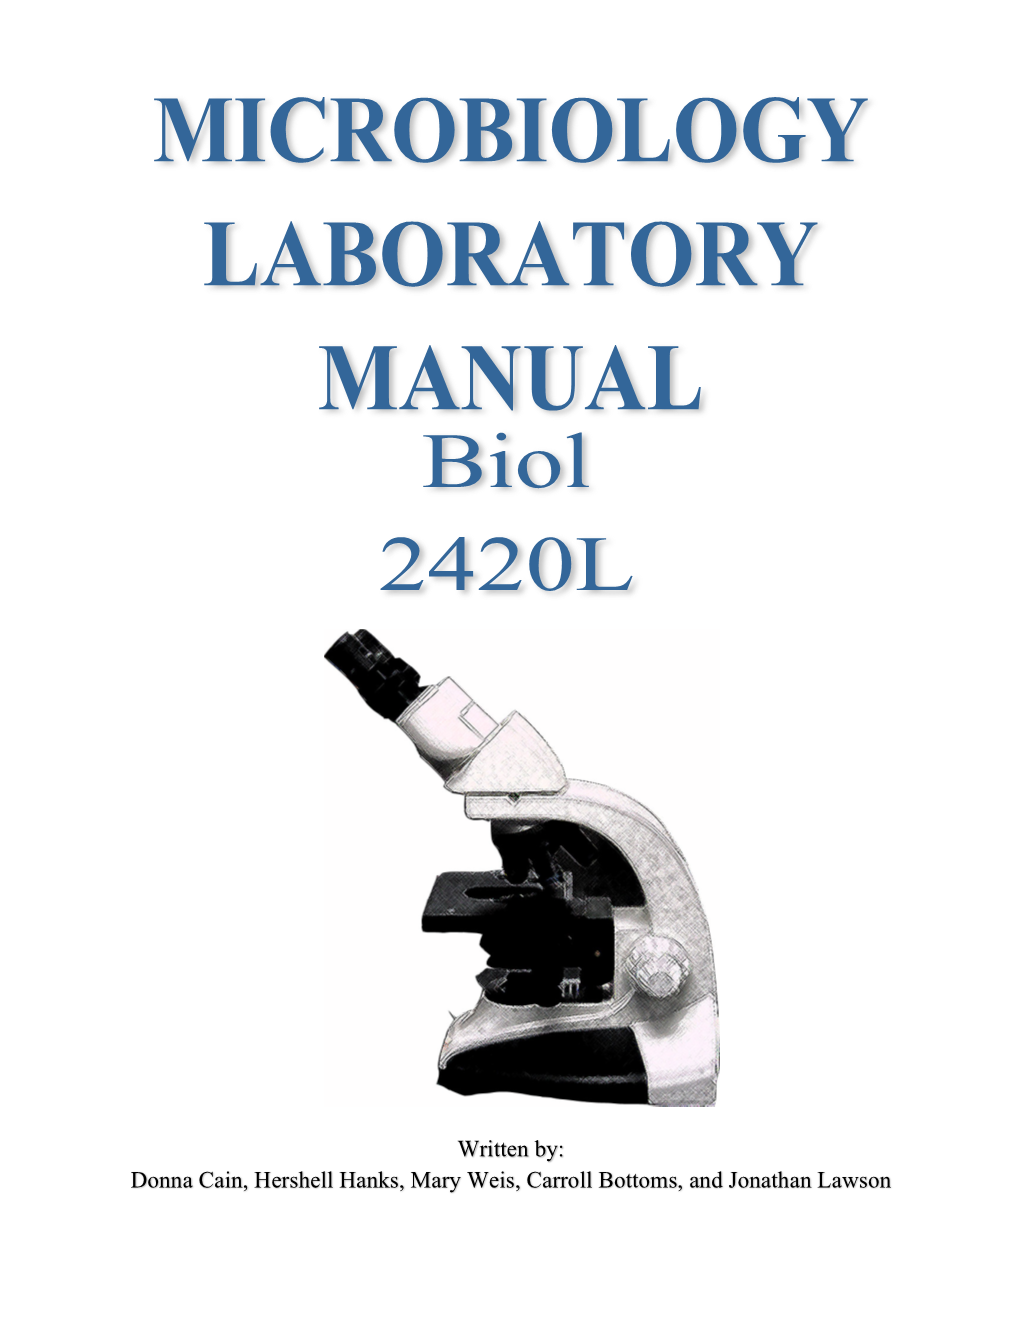 Lab Manual -- Do Not Write in Your Lab Manual Or Notebook Until AFTER You Have Removed Your Gloves and Apron and Washed Your Hands!